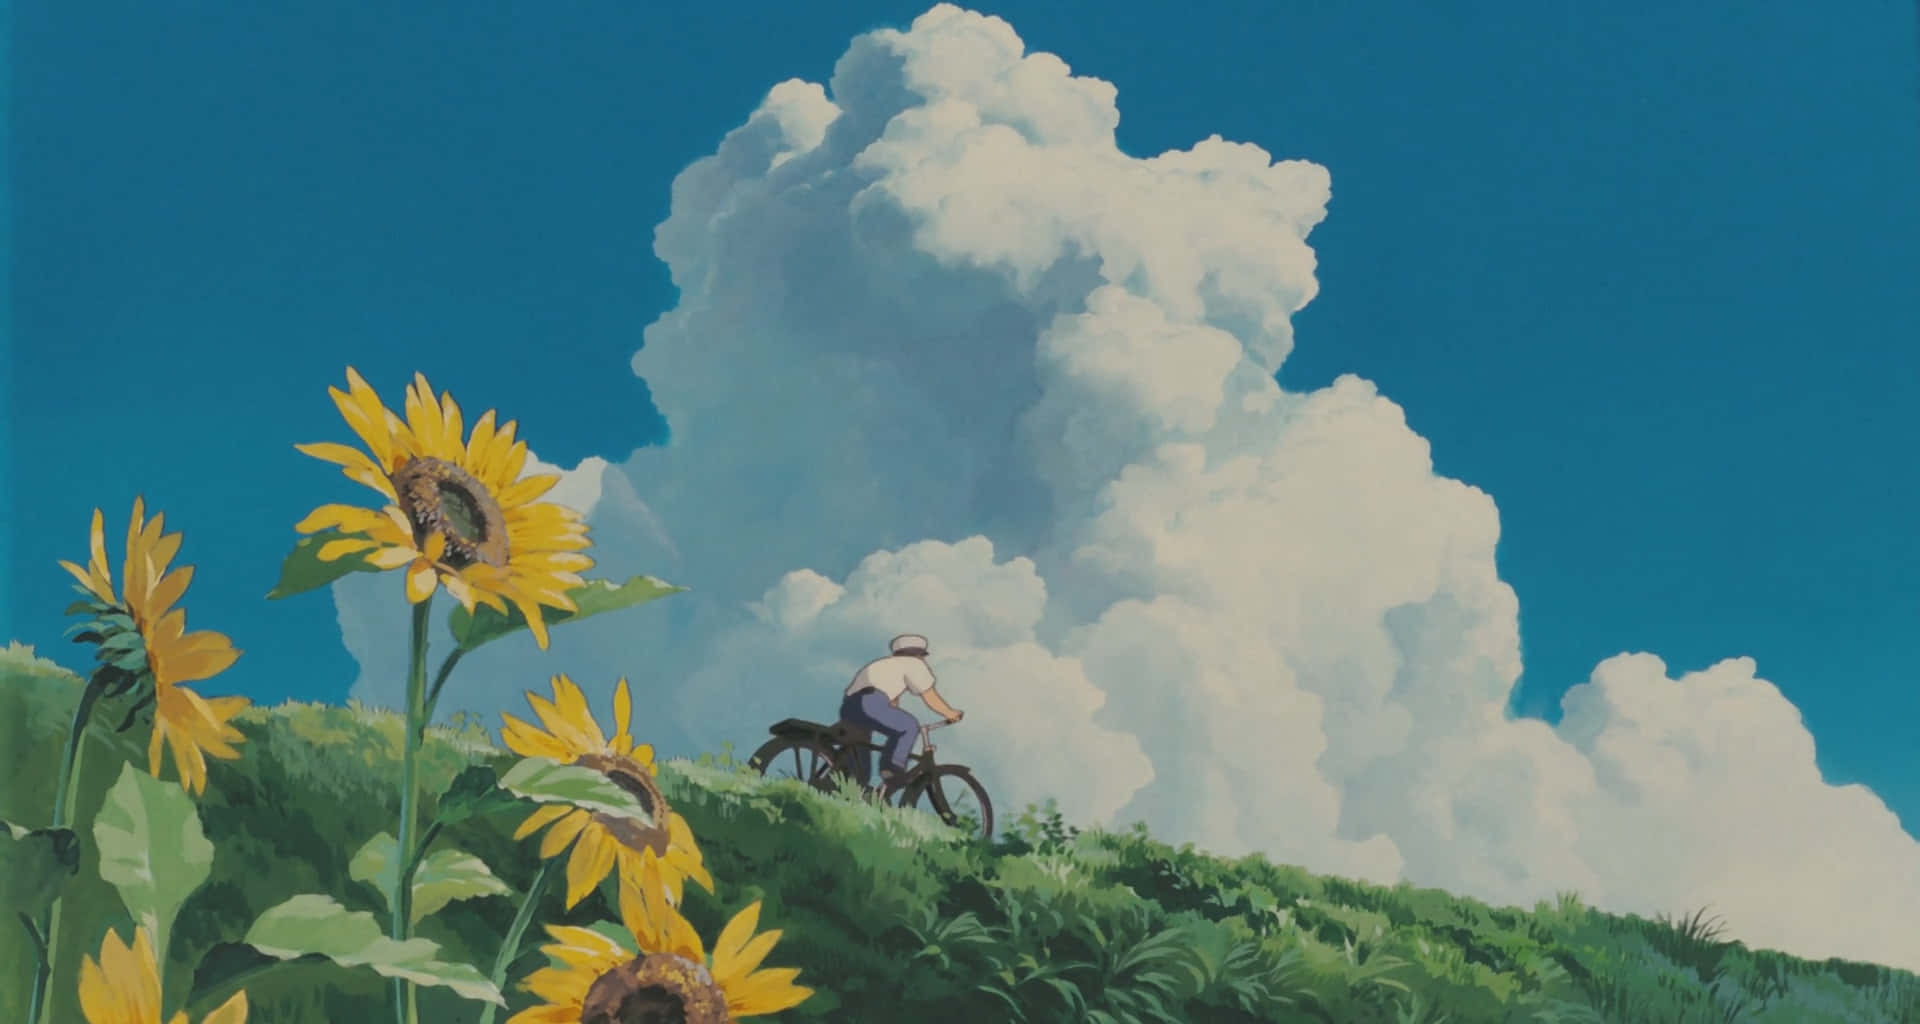 "The enchantment of nature, as revealed in the films of Studio Ghibli" Wallpaper